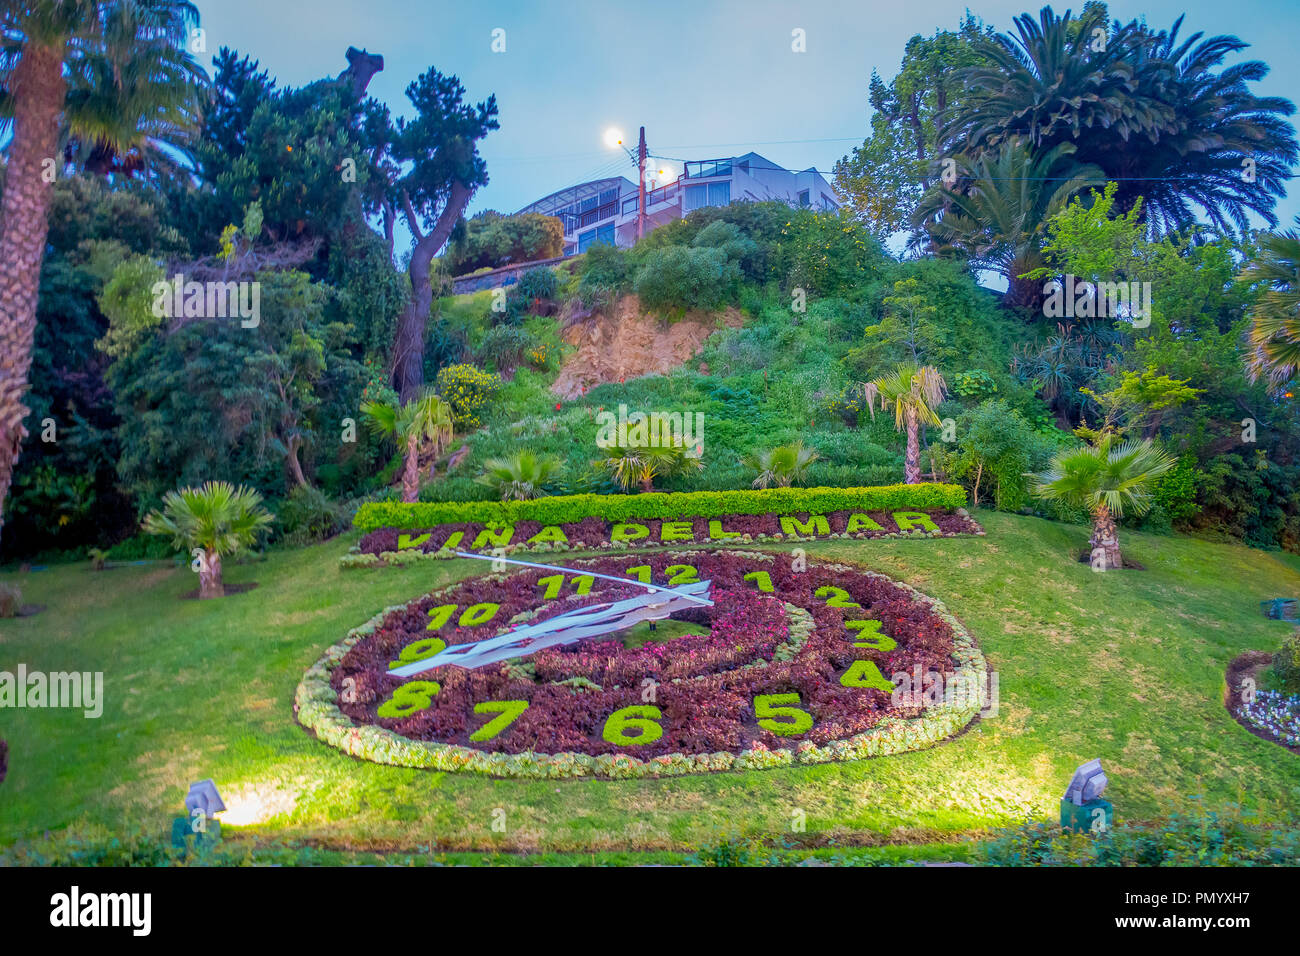 VINA DEL MAR, CHILE - SEPTEMBER, 15, 2018: Outdoor view of flower clock in Vina del Mar, is one of the most populat touristic destinations in Chile Stock Photo